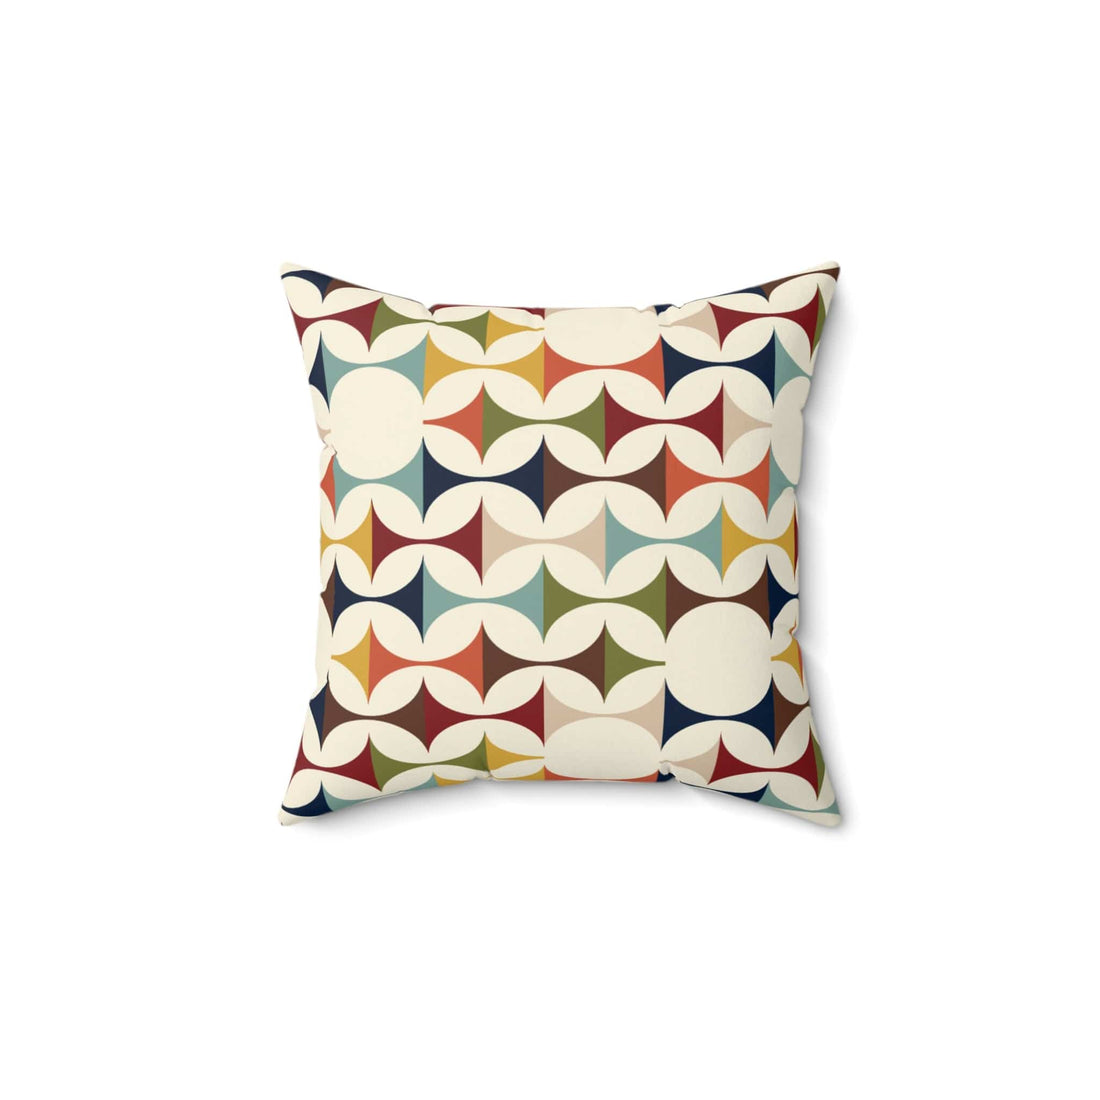 Kate McEnroe New York Mid Century Modern Geometric Throw Pillow with Insert, Retro 60s Modernist Color Block Cushions Throw Pillows 14&quot; × 14&quot; 22304436858549412257